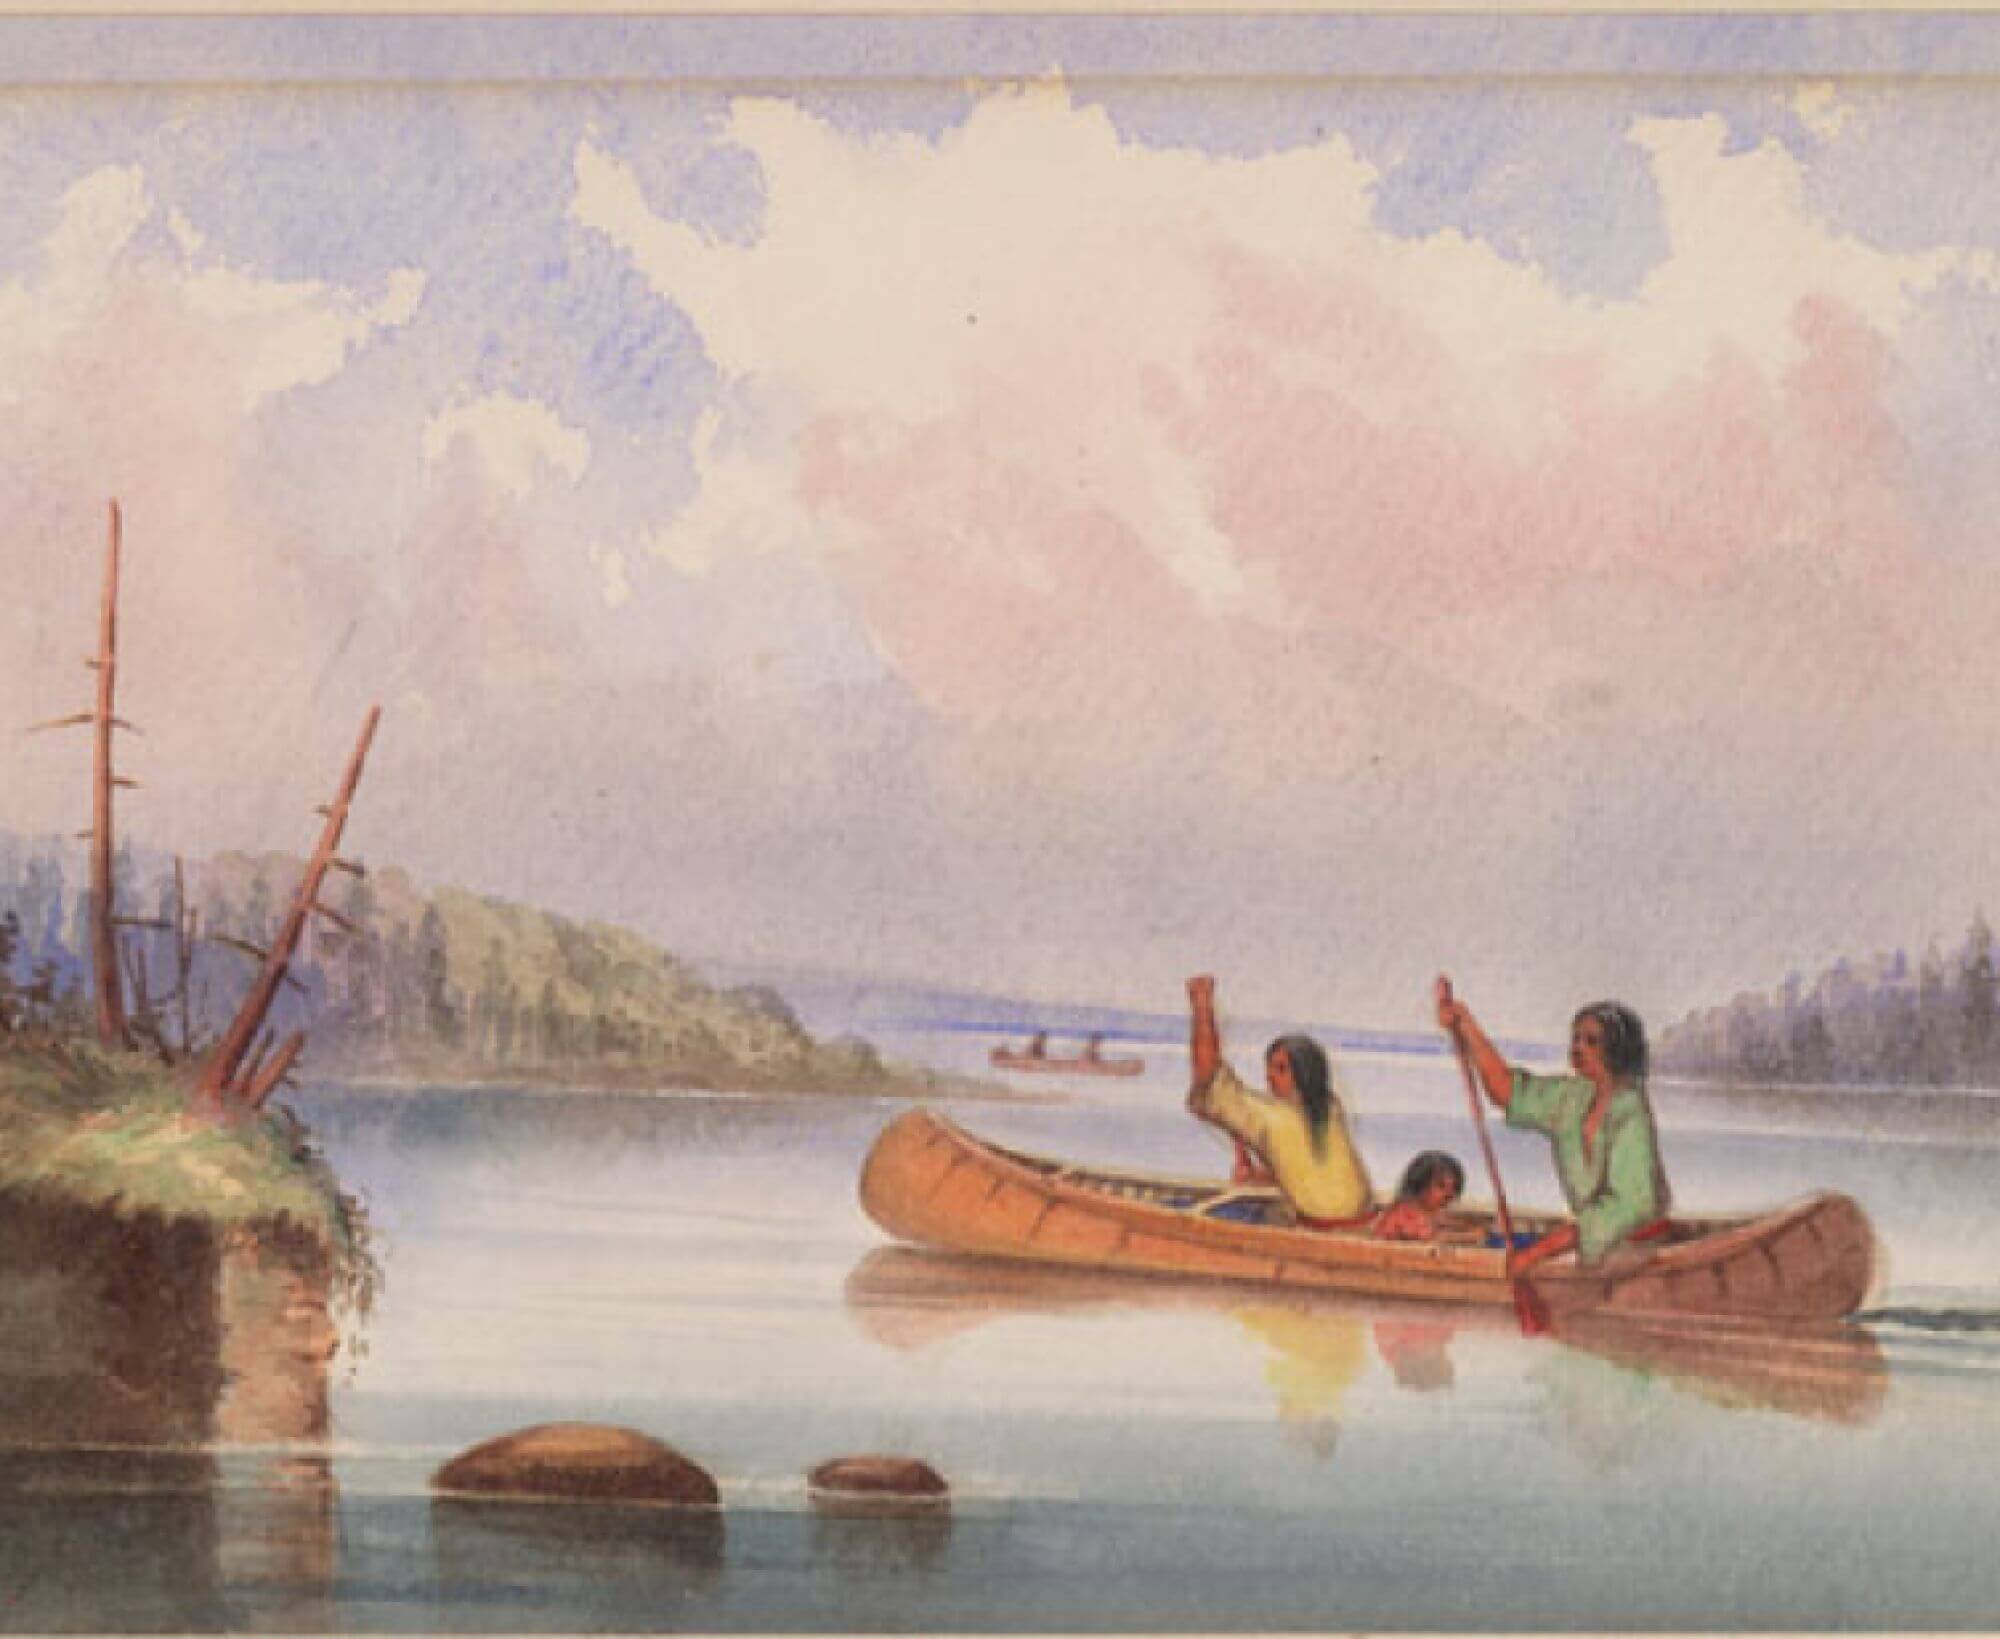 Watercolor painting of man, woman and child in a canoe. The man and woman paddle the canoe while the child is sitting. To the left is an island and two rocks. In the background is water and two islands of forested land. In the distance is another canoe with two people aboard.